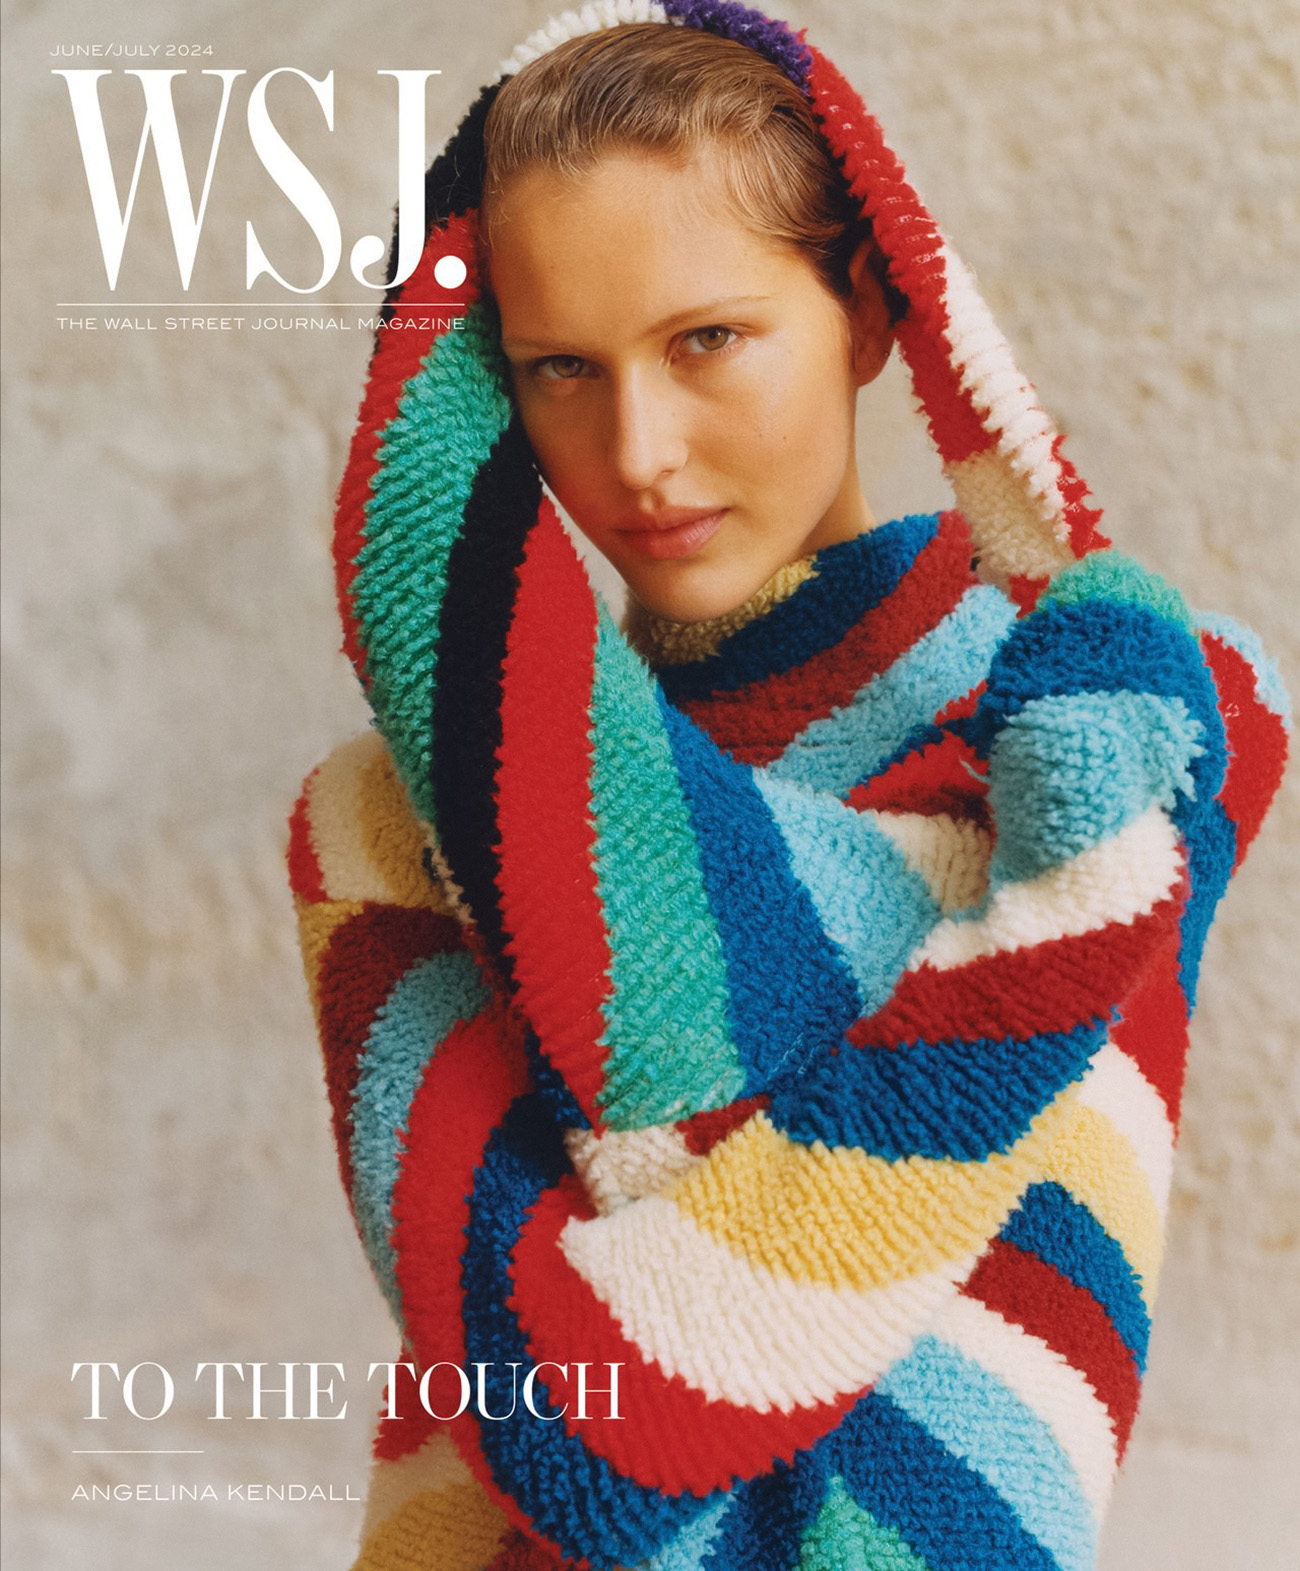 Angelina Kendall covers WSJ. Magazine June-July 2024 Digital Edition by Théo de Gueltzl